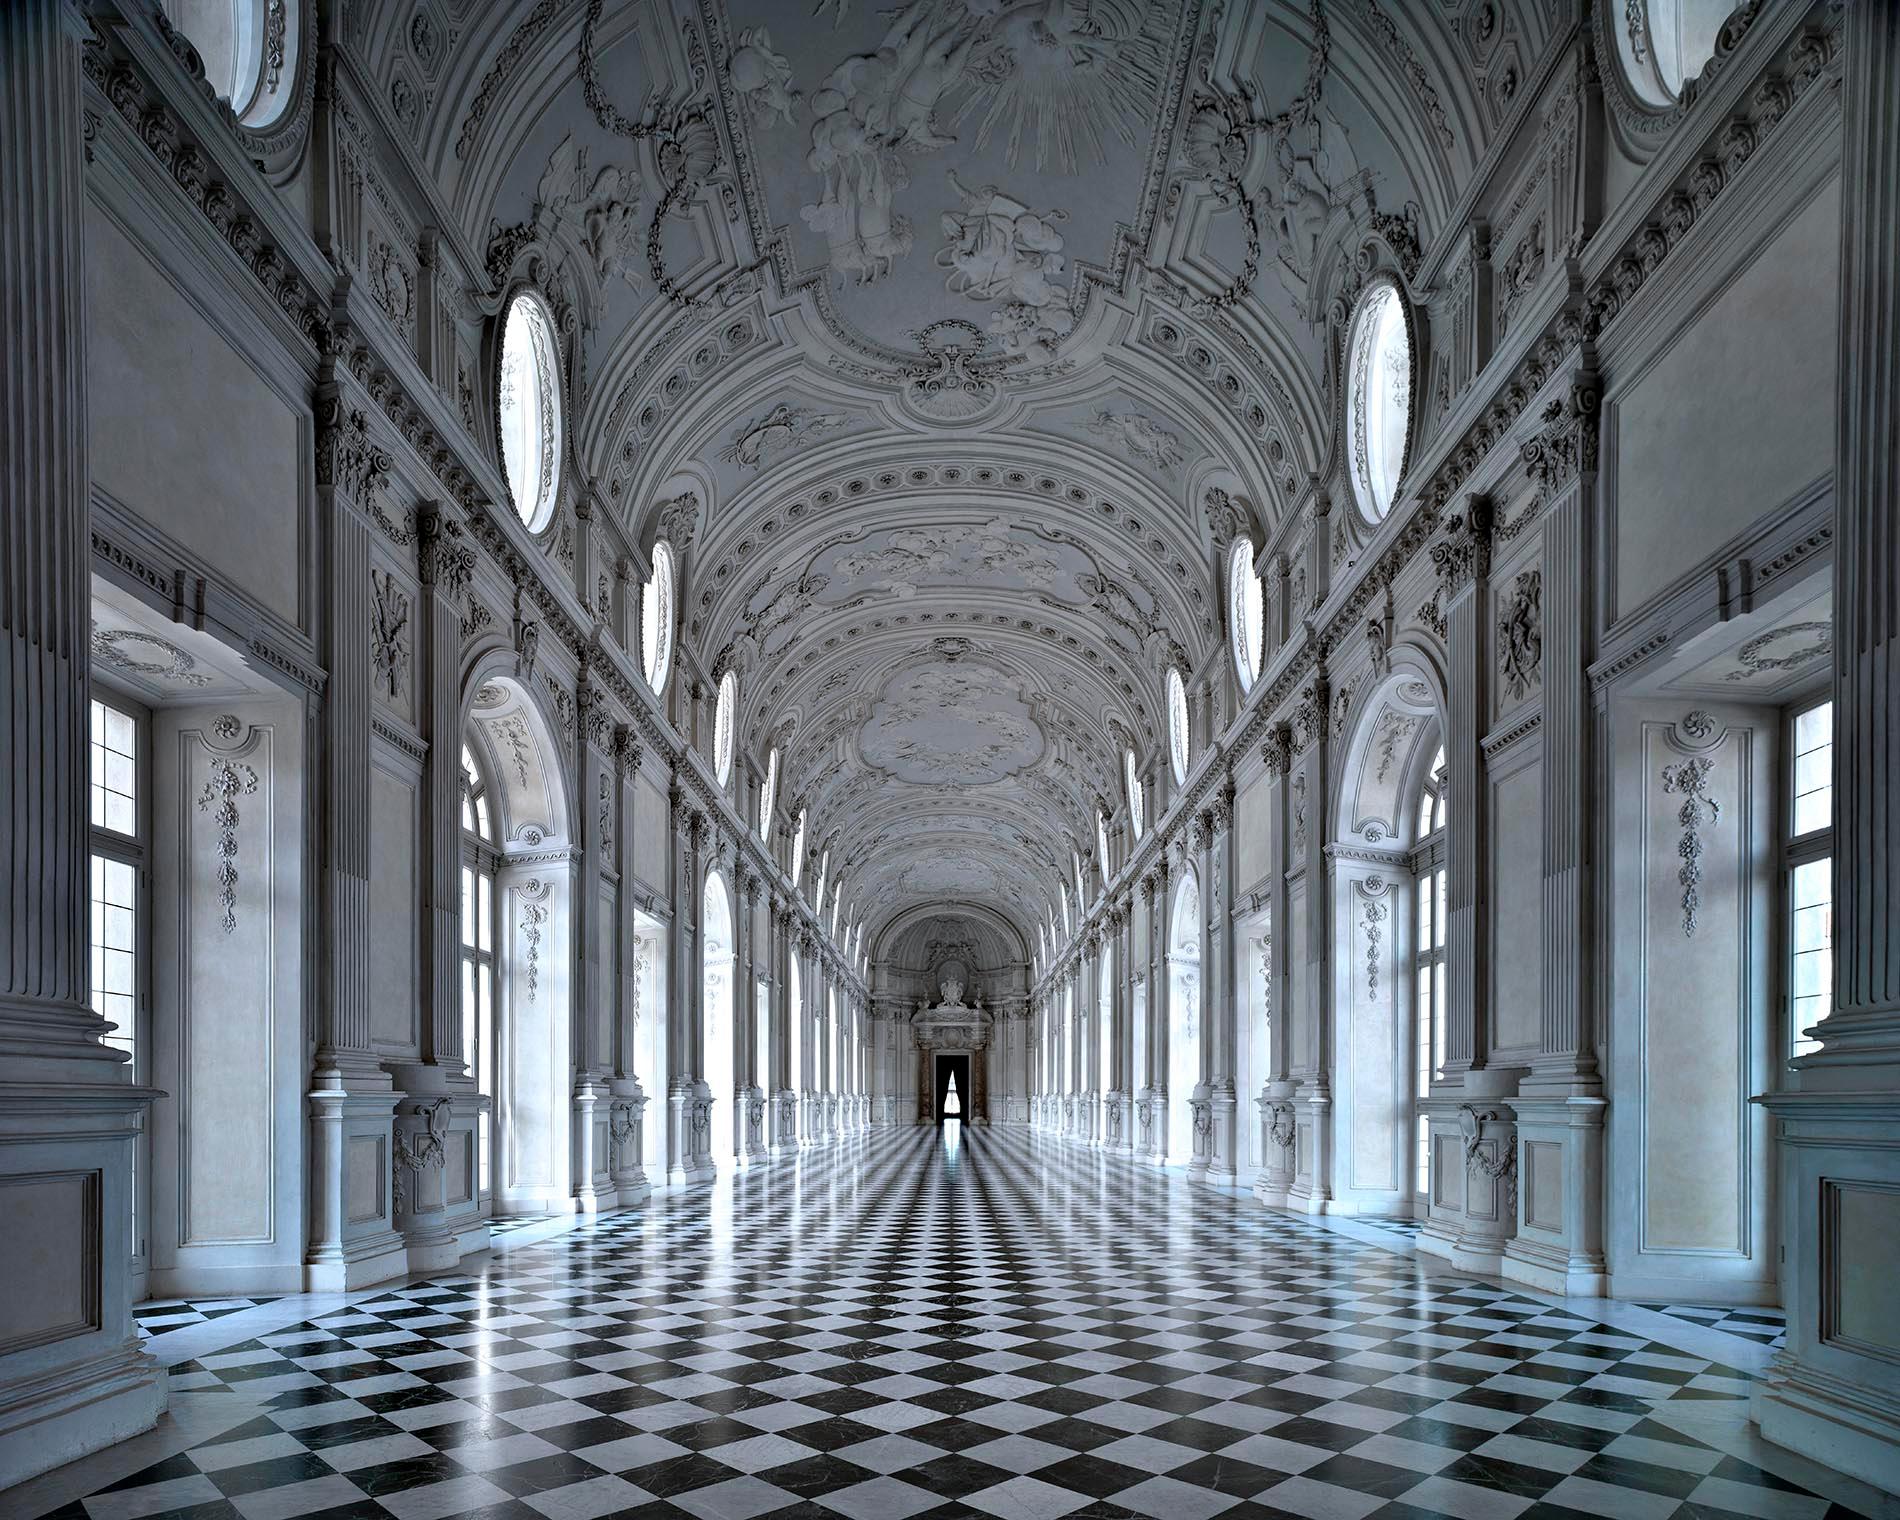 Venaria Reale XI, Torino, 2016
Chromogenic print
Edition of 5
Signed, dated, and numbered on verso label   
Mounted on aluminum

39.5 x 47.5 inches edition of 5  
47.5 x 59 inches edition of 5  
71 x 88.5 inches edition of 5   

Florentine